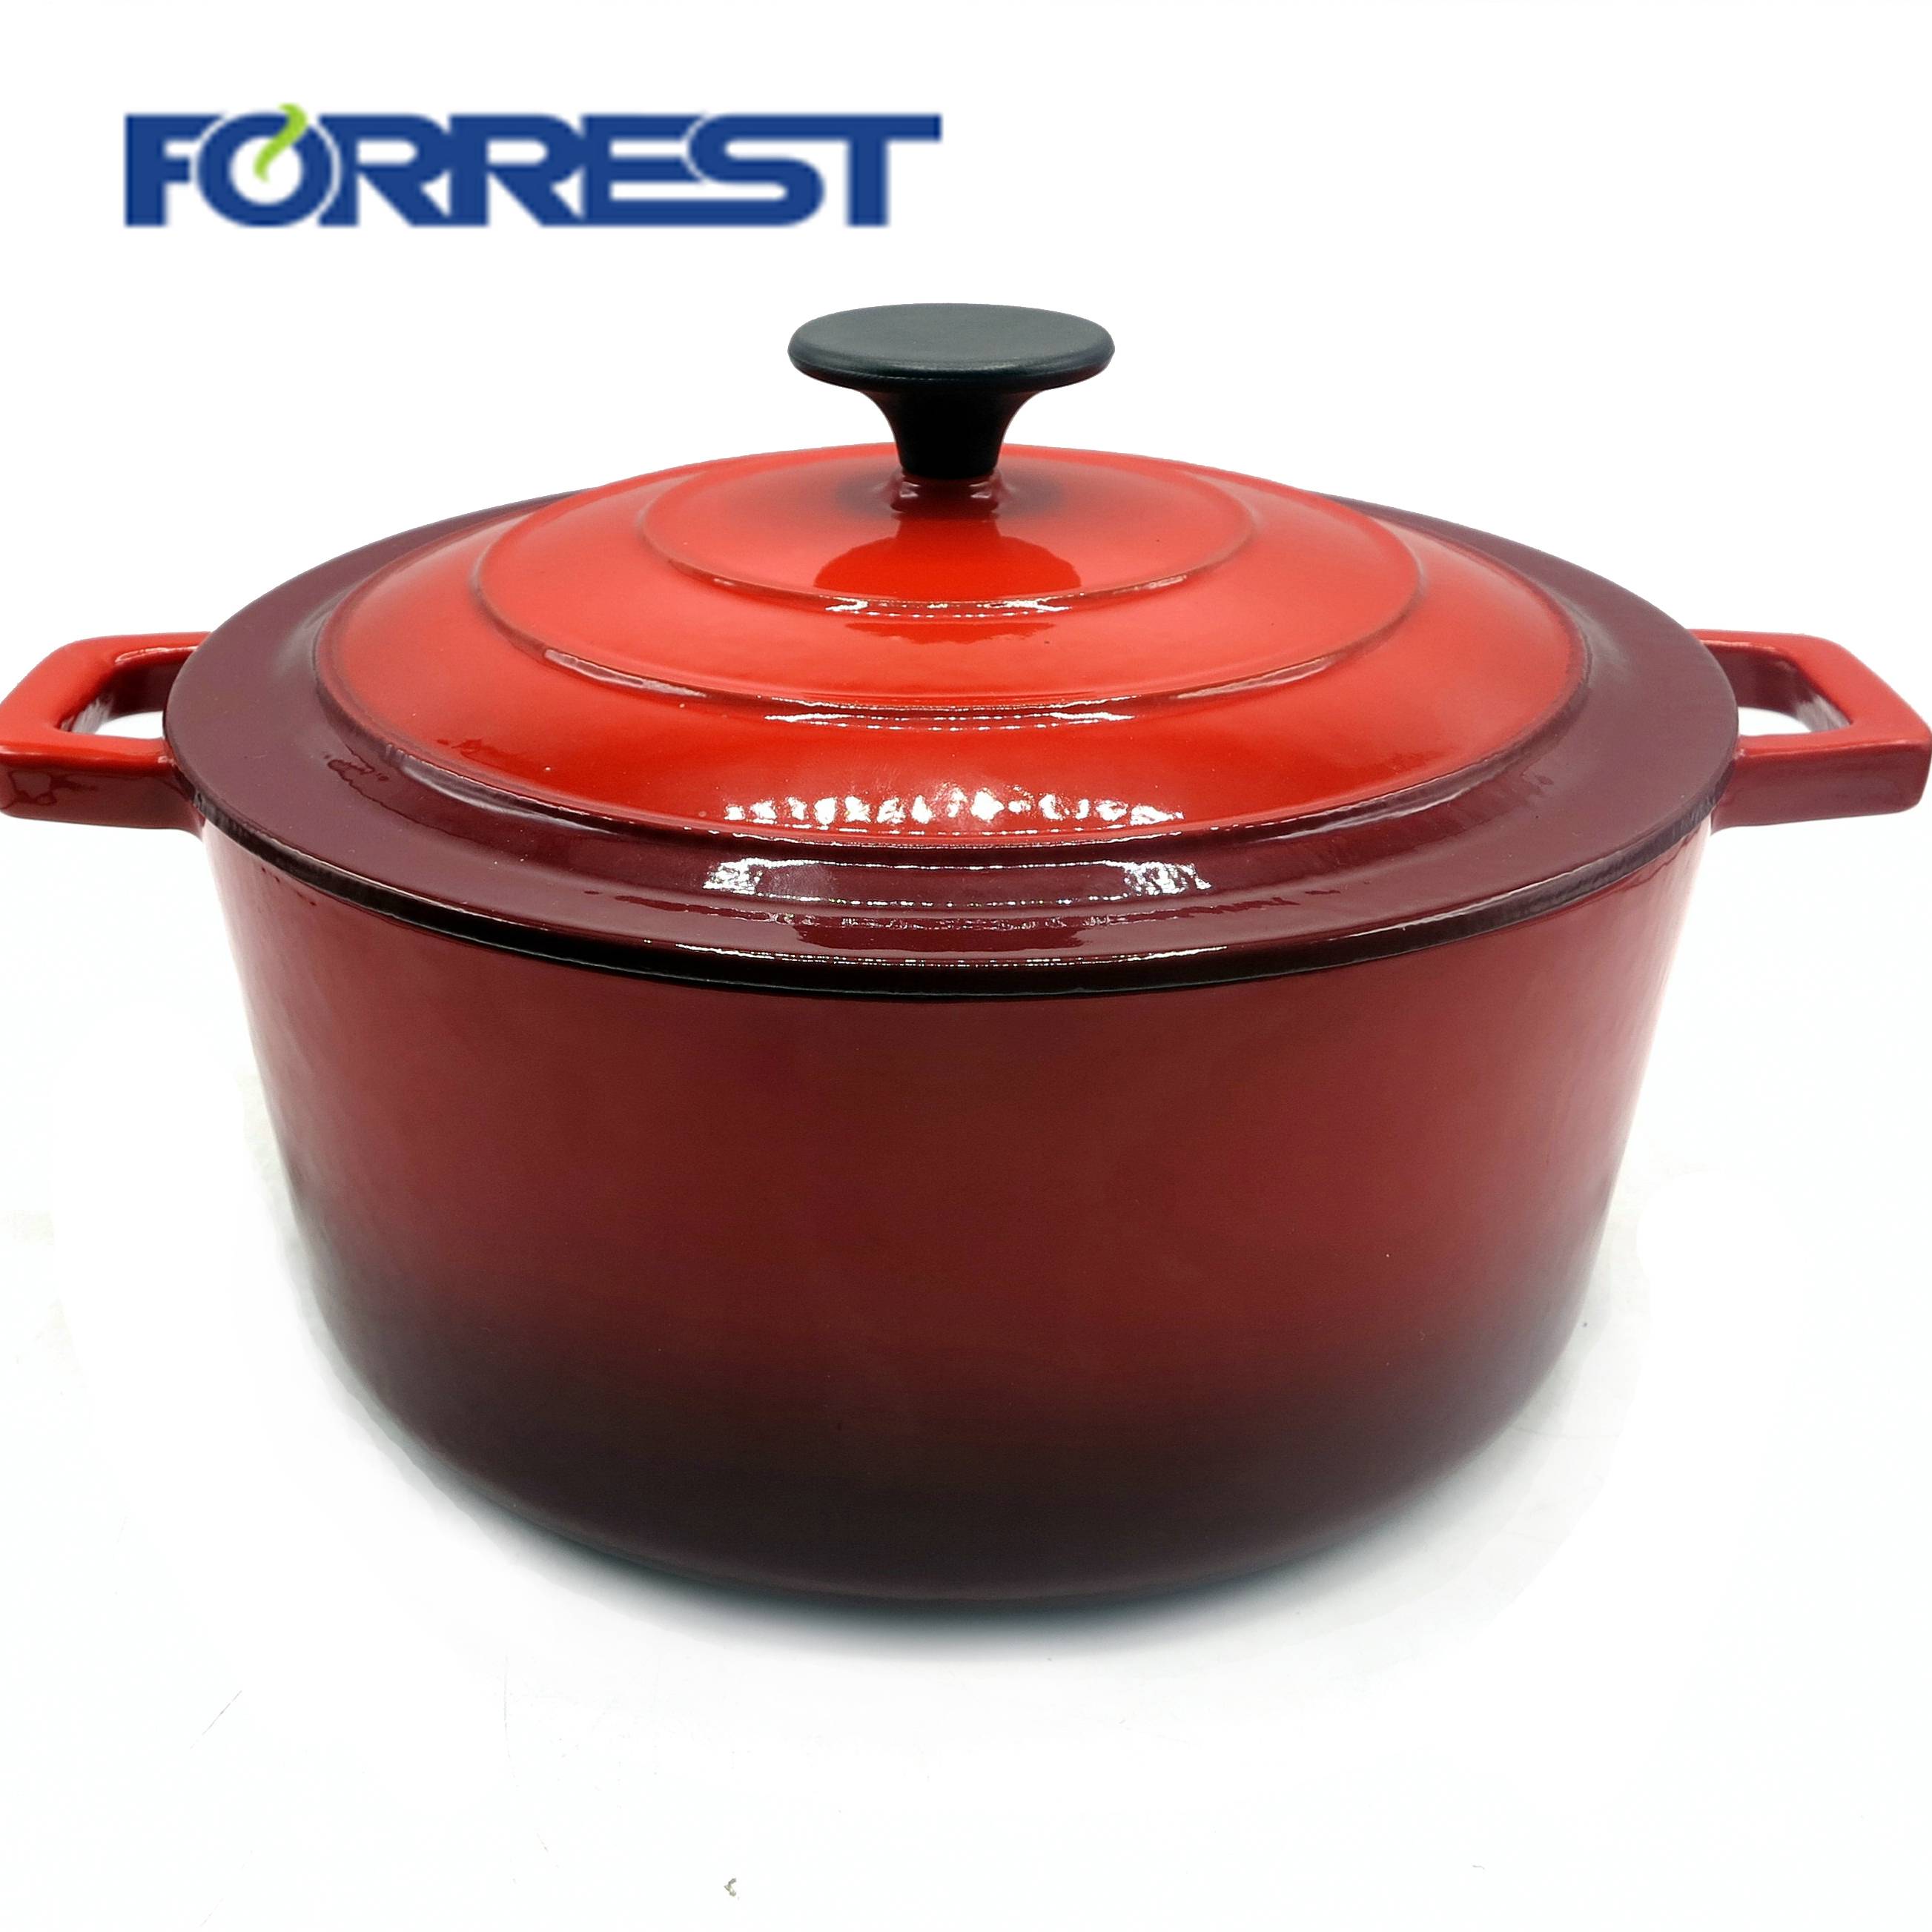 Low MOQ for Enamel Cast Iron Casserole Sets - Amazon Hot sale  enamel cookware set insulated food warmer cast iron casserole for kitchen cooking delicious food dia 25.5CM – Forrest